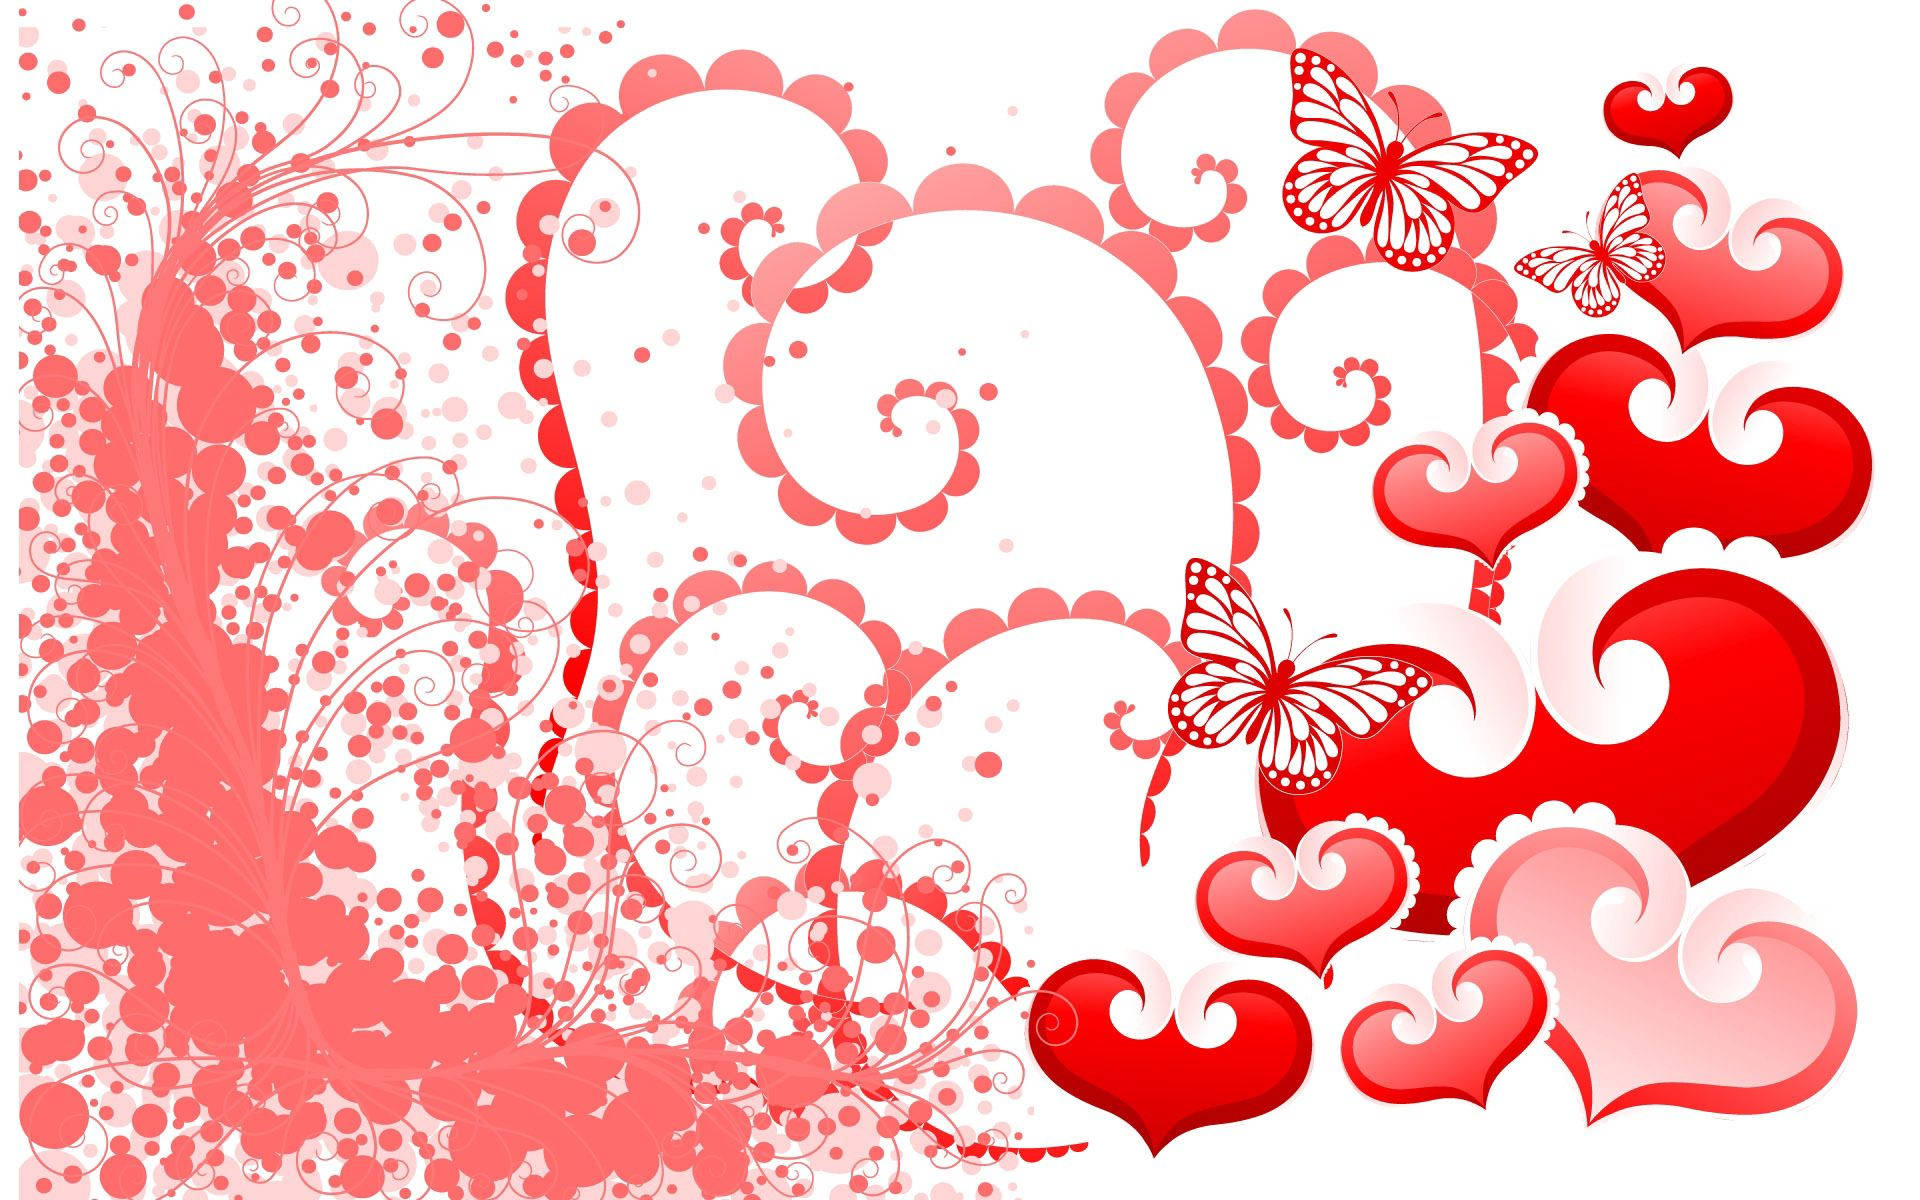 Butterflies And Hearts For Valentine's Day Wallpaper